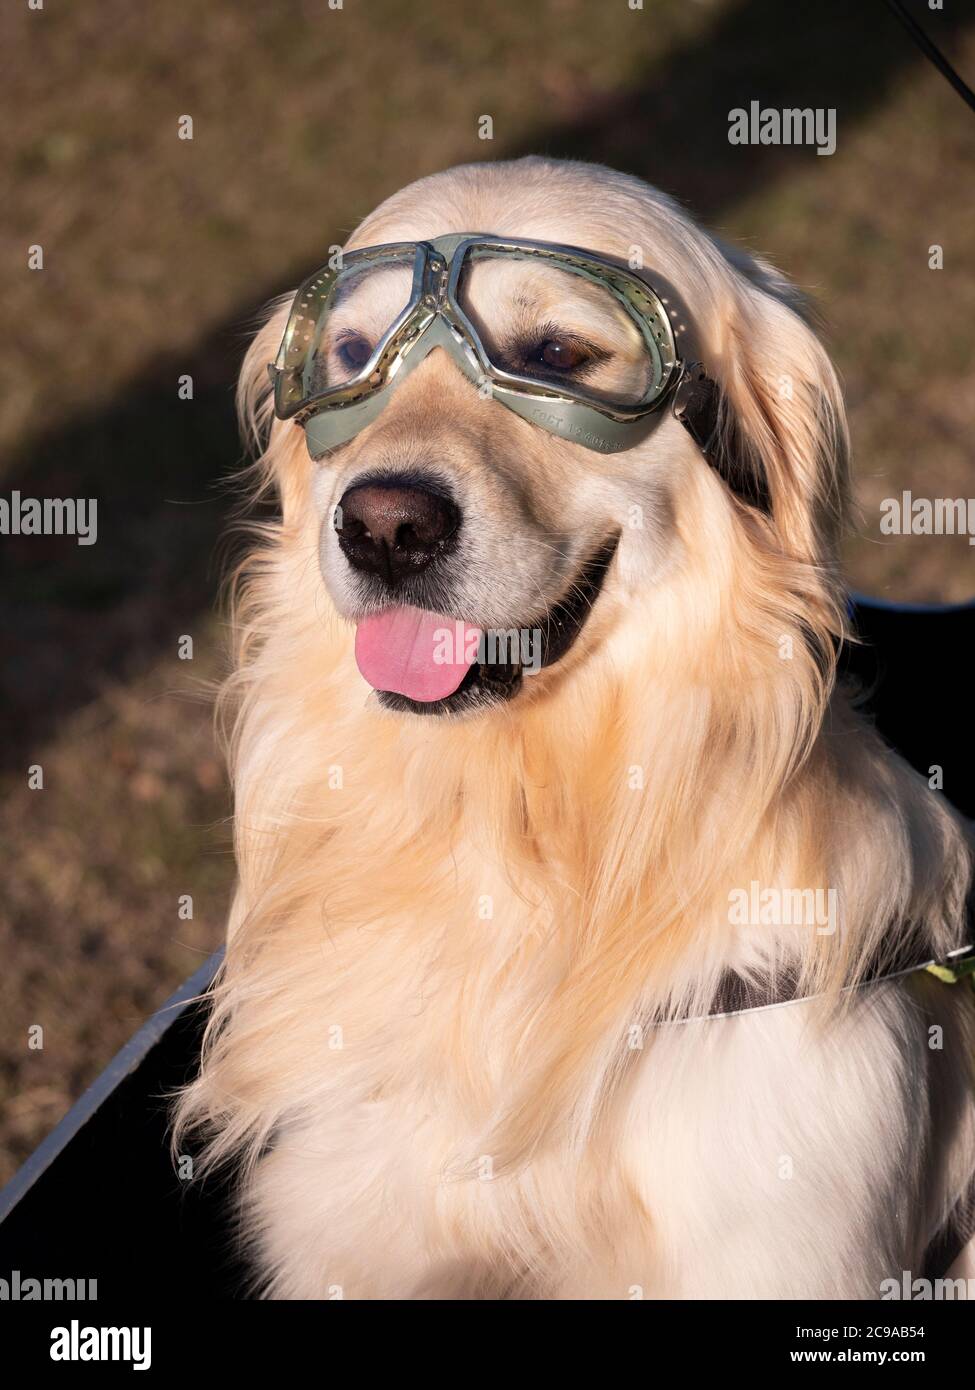 Young Golden Retriever sitting in the front of a delivery bike wearing motorcycle goggles. Stock Photo